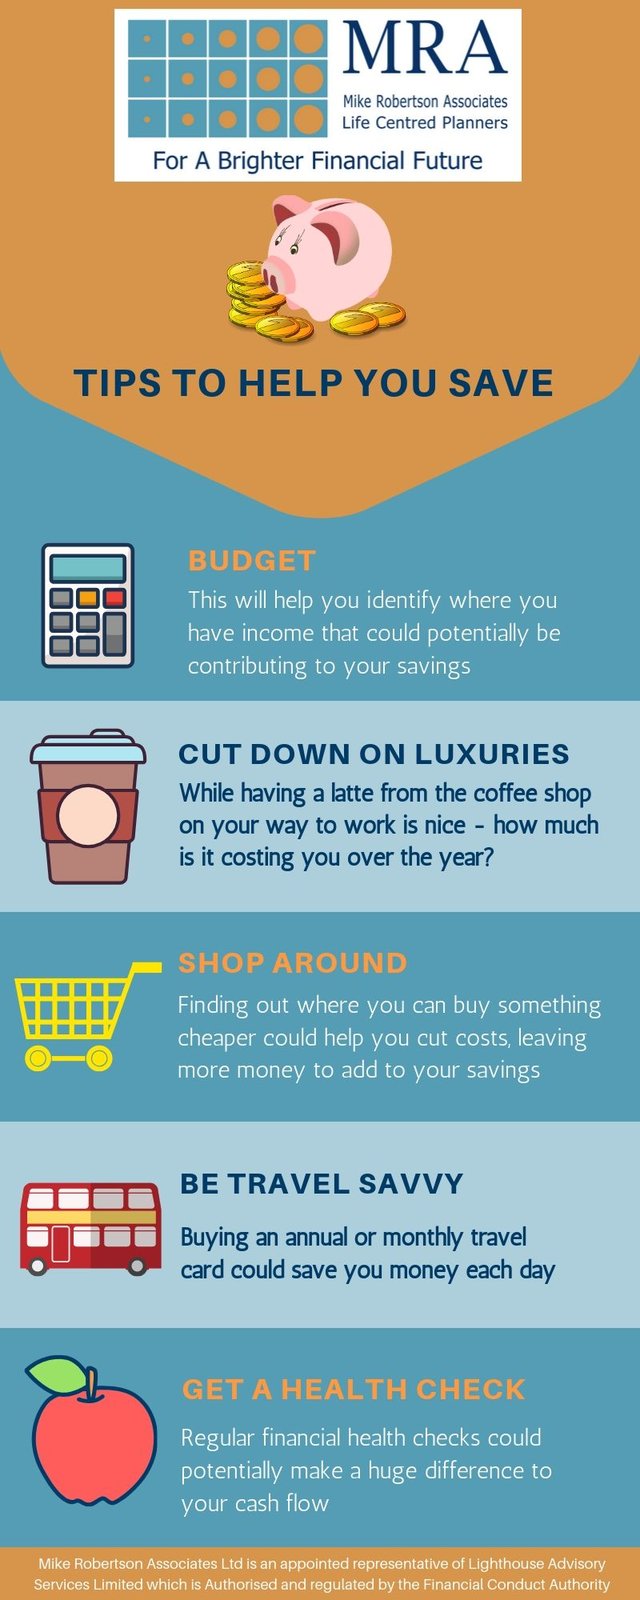 Infographic with 5 tips to help you save: 1. Budget - This will help you identify where you have income that could potentially be contributing to your savings. 2. Cut down on luxuries - While having a latte from the coffee shop on your way to work is nice - how much is it costing you over the year? 3. Shop around - Finding out where you can buy something cheaper could help you cut costs, leaving more money to add to your savings. 4. Be travel savvy - Buying an annual or monthly travel card could save you money each day. 5. Get a financial health check- Regular financial health checks could potentially make a huge difference to your cash flow. Mike Robertson Associates are Life Centred Financial Planners.  Call us on 01424 777 156.